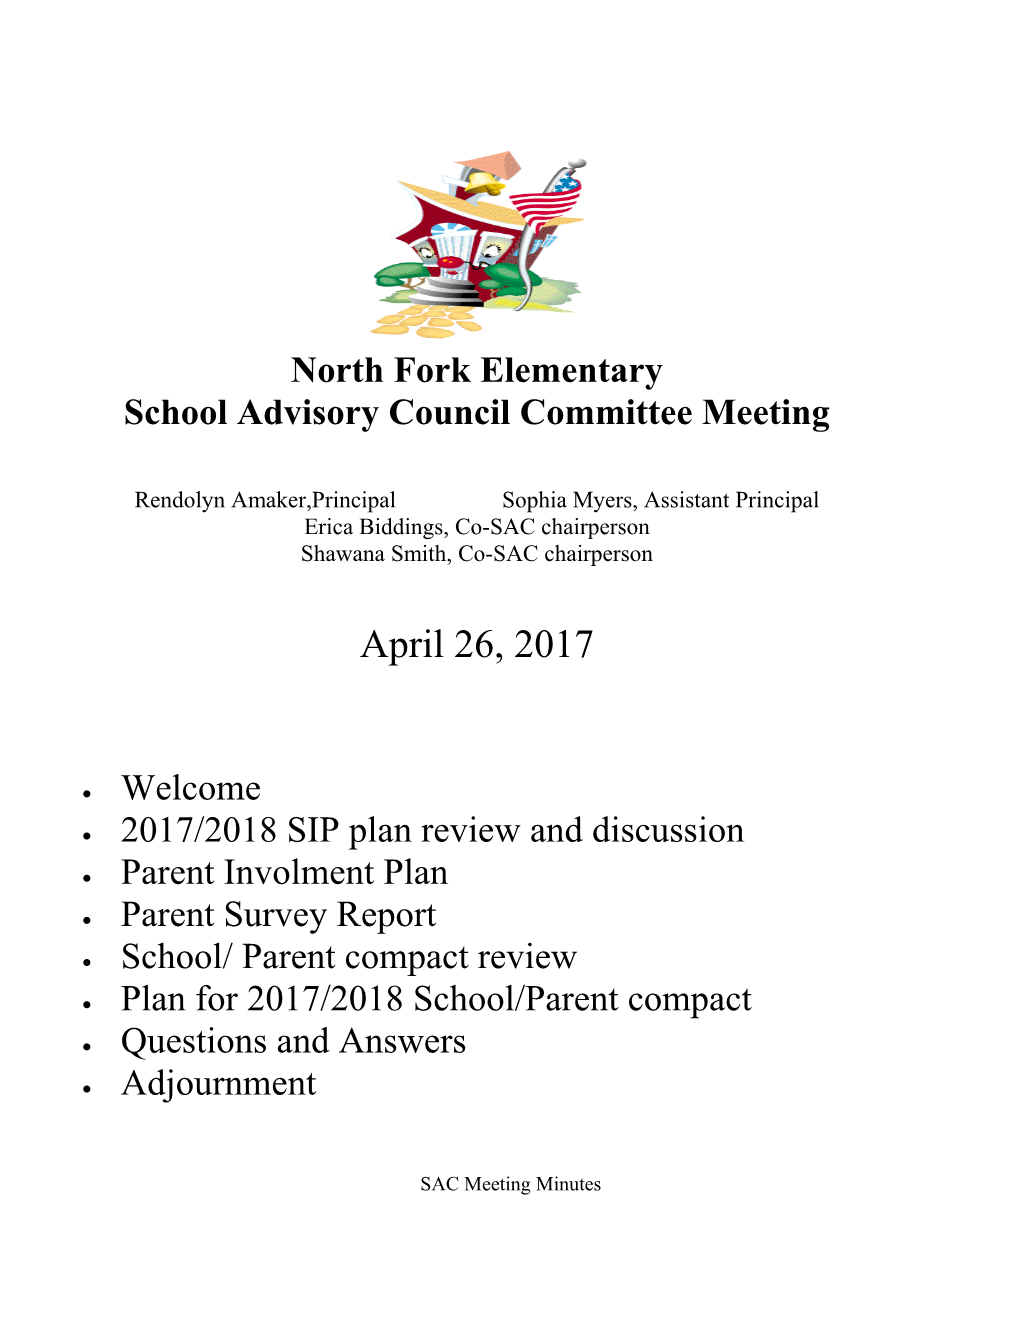 School Advisory Council Committee Meeting